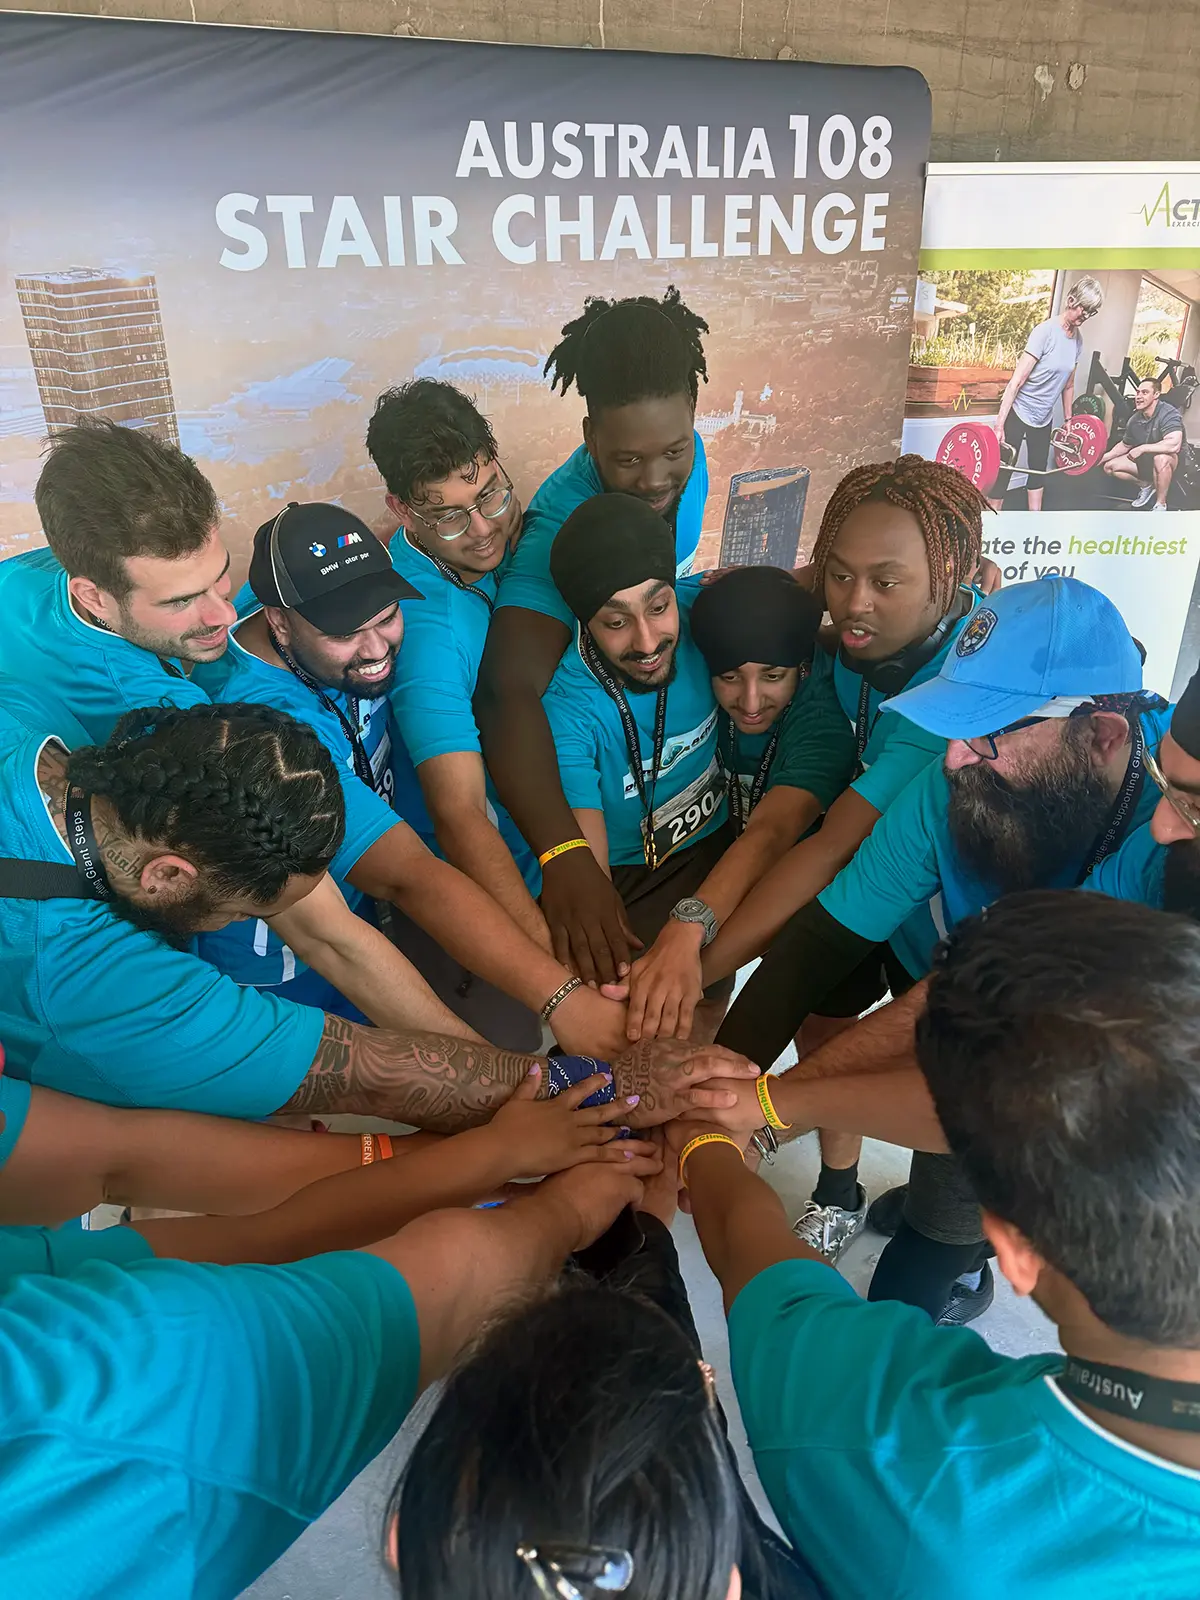 AVP Perminderjit Singh's DreamAchiever Team join hands in a huddle before they climb Australia 108 